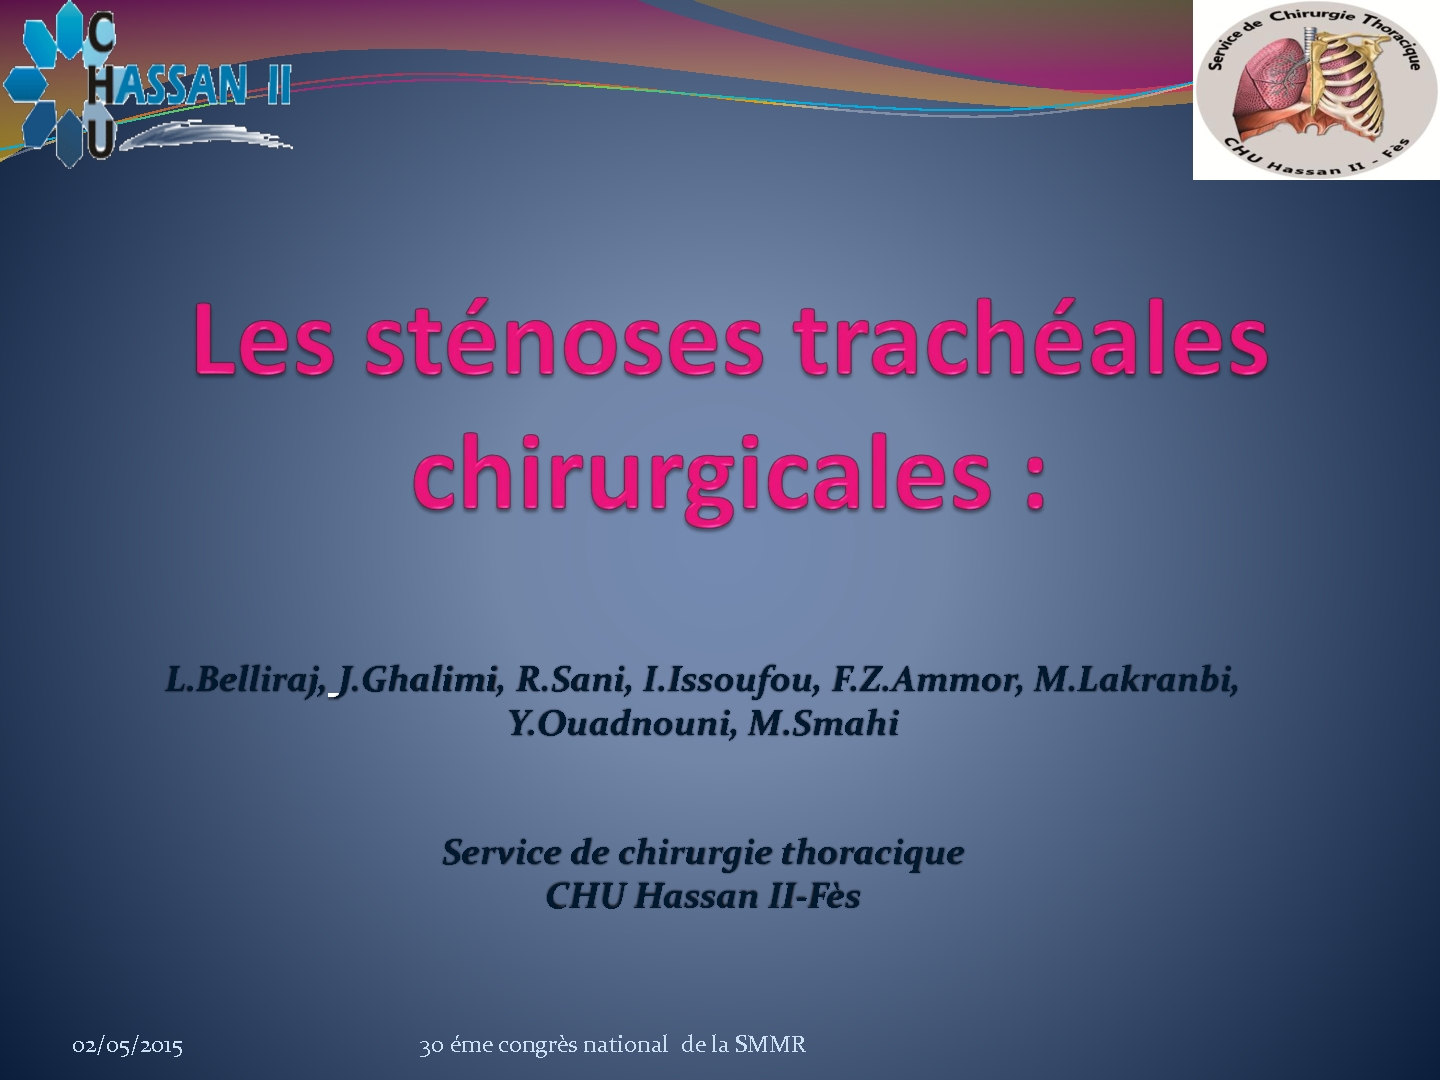 Les sténoses trachéales chirurgicales